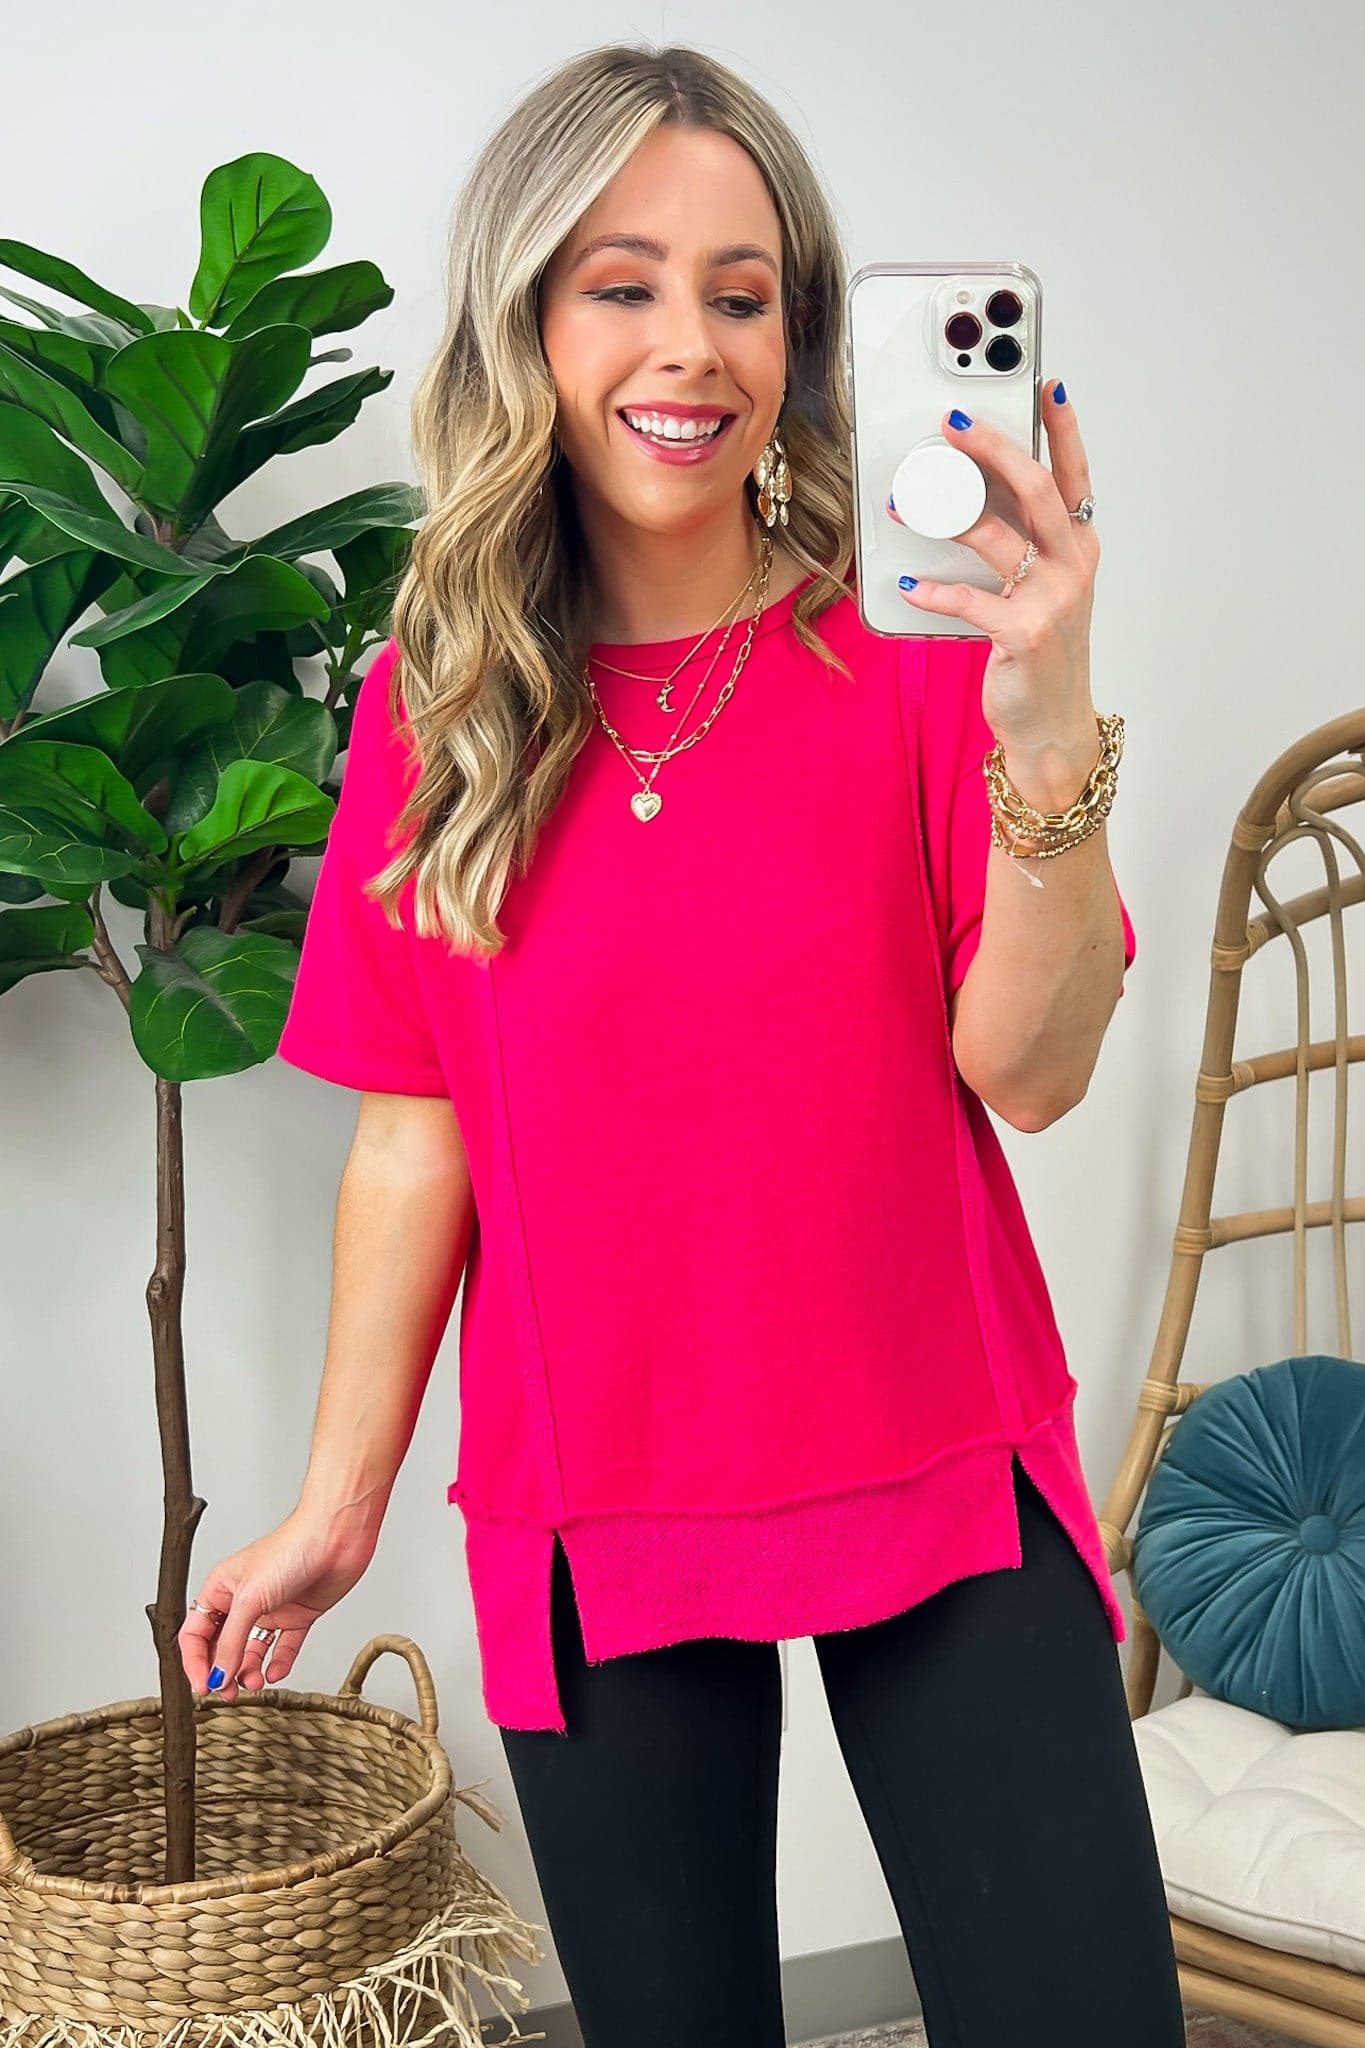  Vitoria Exposed Seam Relaxed Fit Top - FINAL SALE - Madison and Mallory